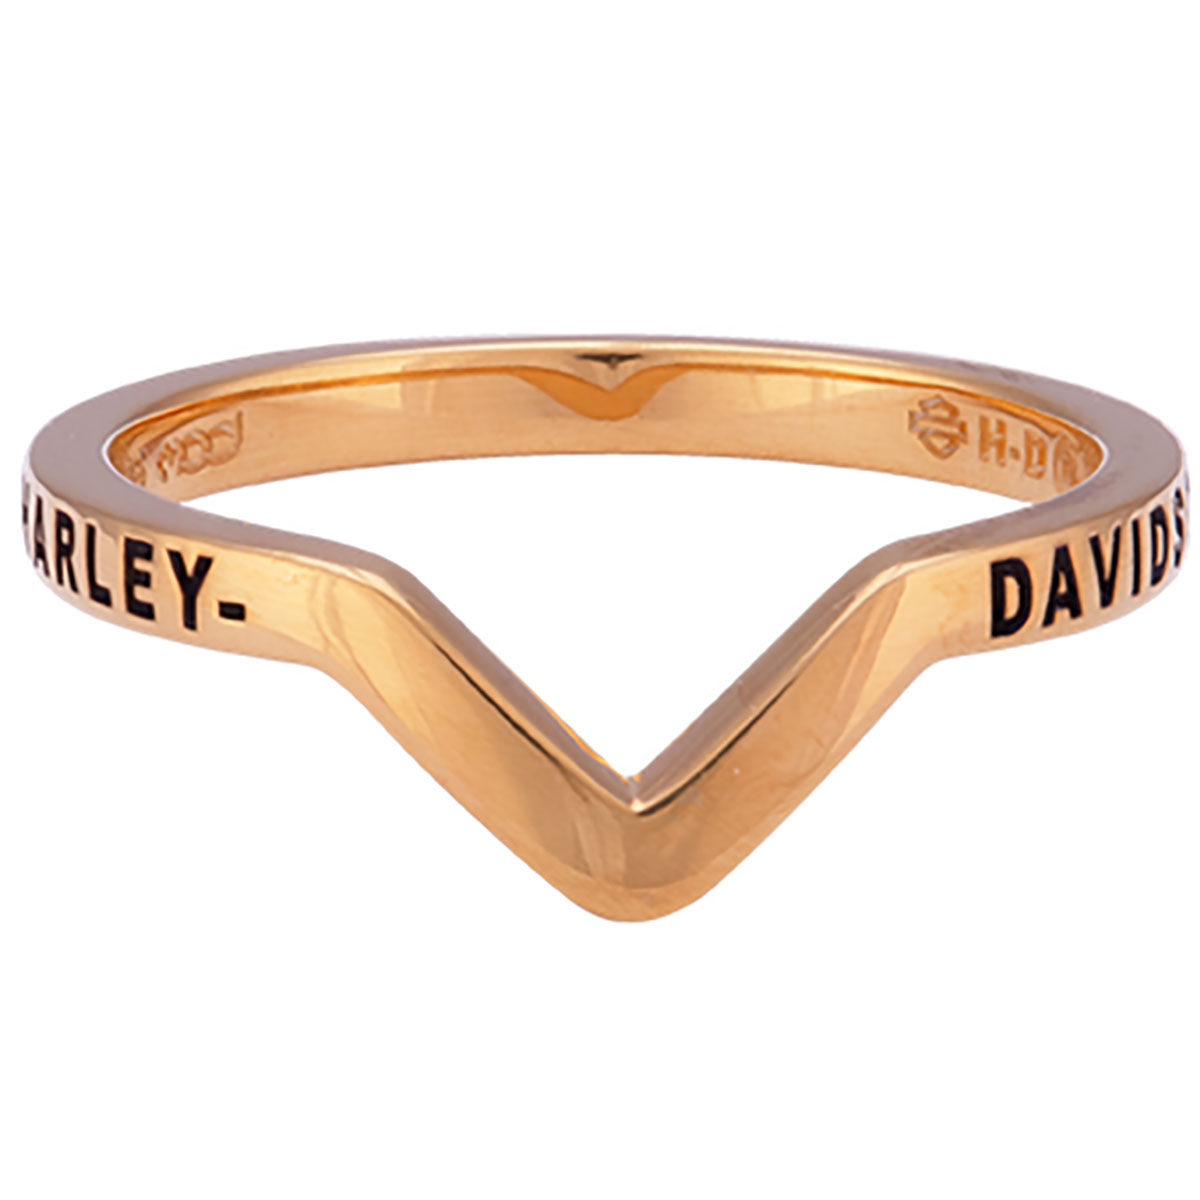 HARLEY DAVIDSON GOLD PLATED CURVED STACKABLE RING